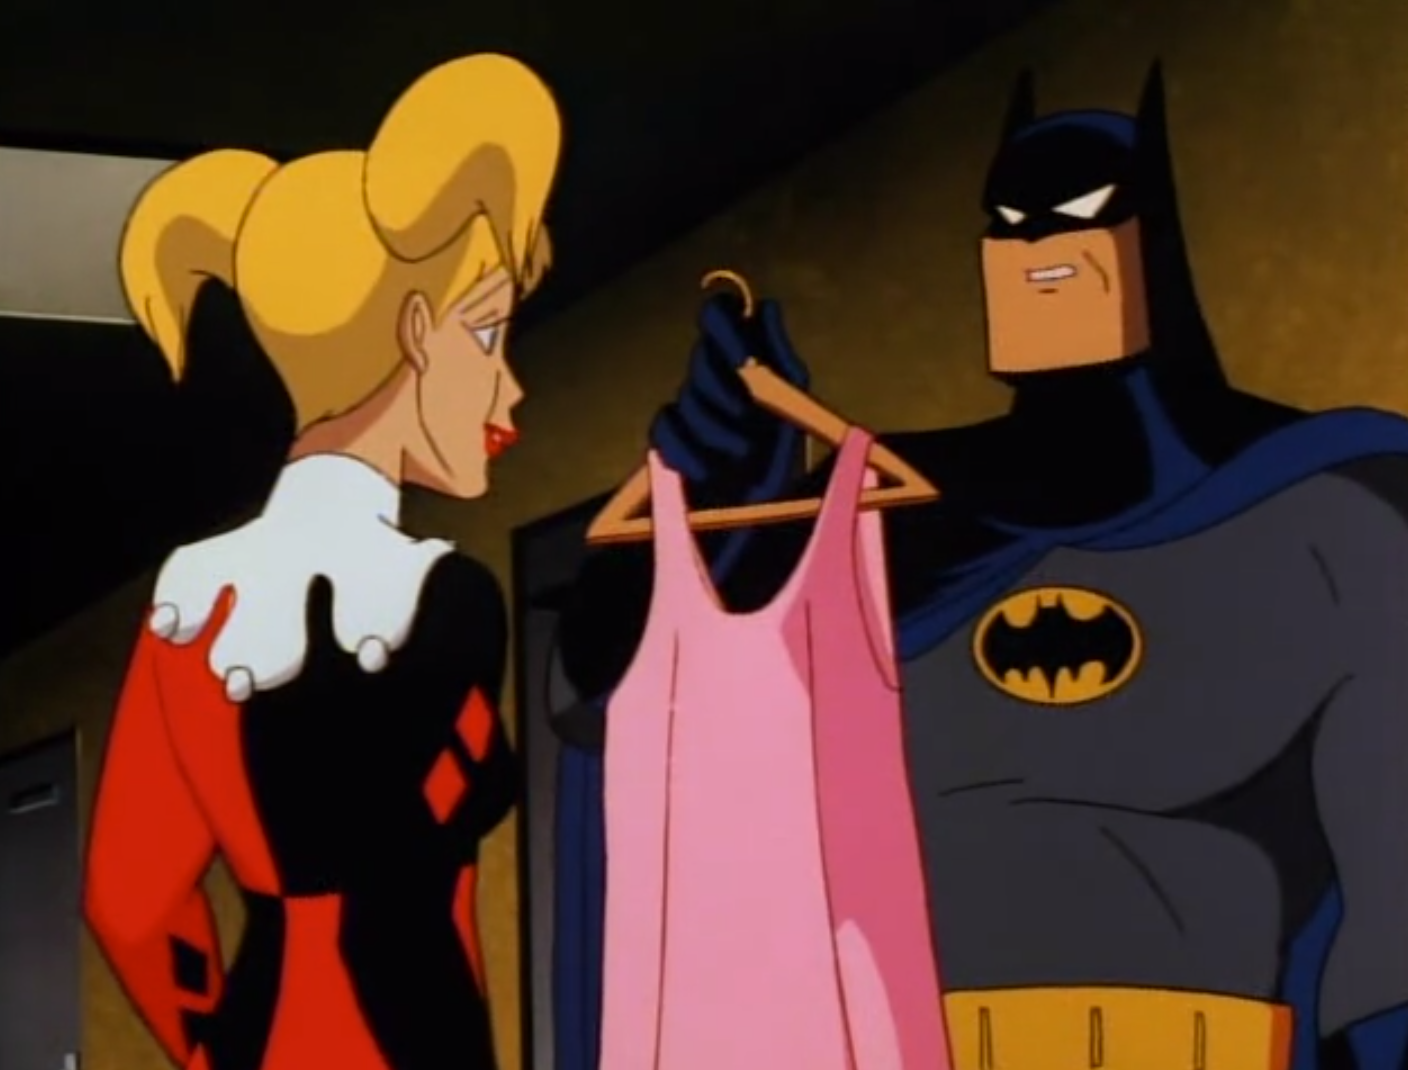 Batman gives Harley Quinn a dress after her long, bad day at the end of "Harley's Holiday" from Batman: The Animated Series.